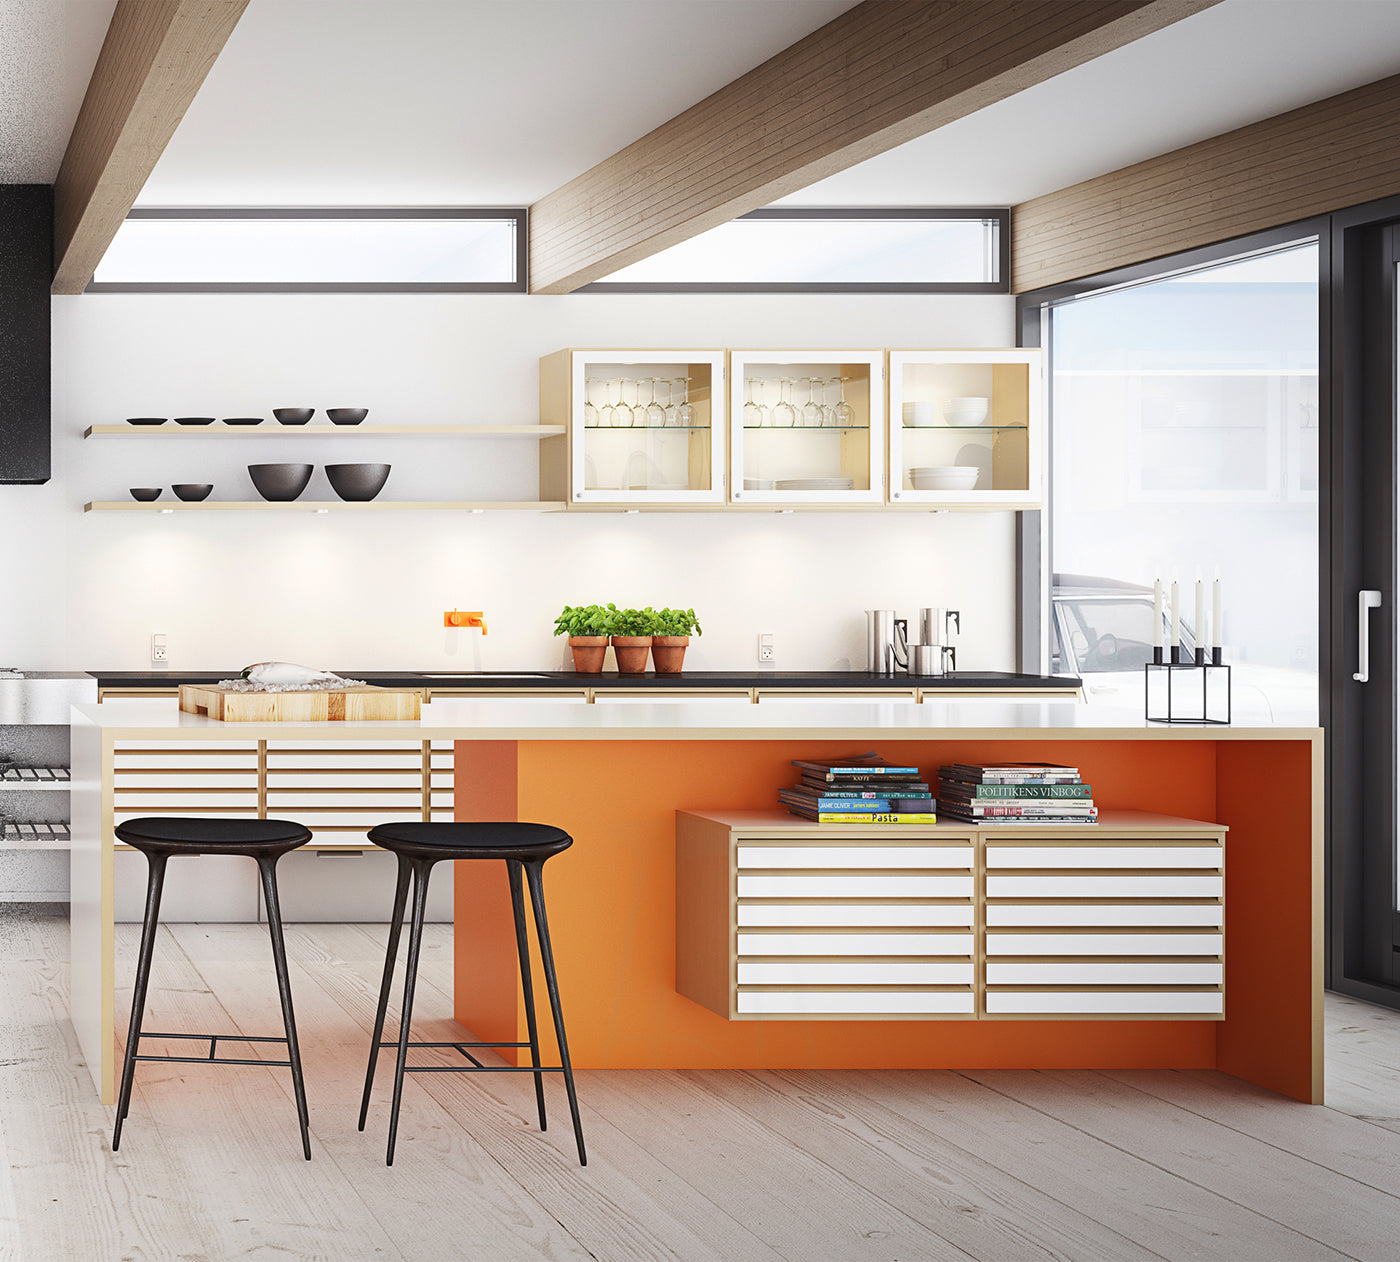 Why Selecting The Right Kitchen Materials Matter